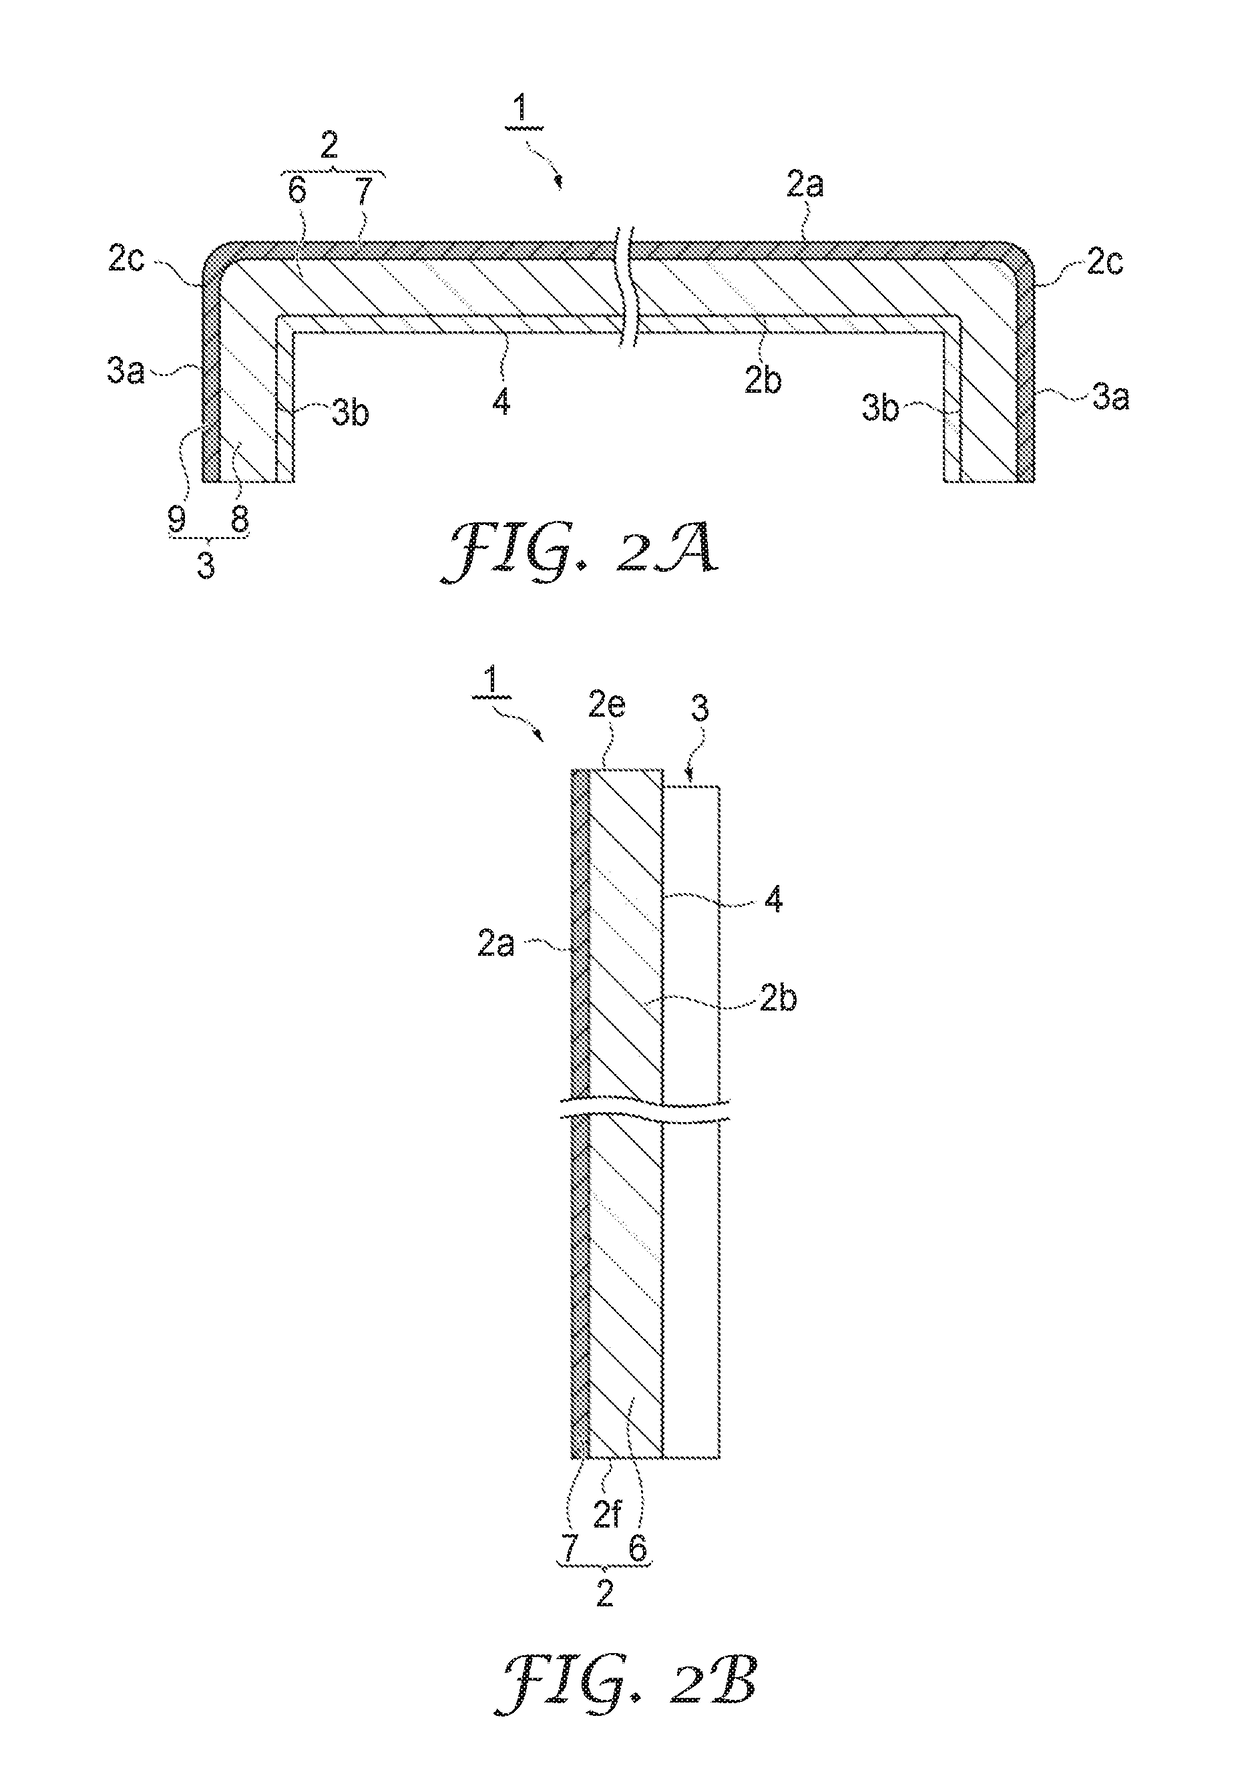 Adhesive backed decorative article, method of making, and method of use